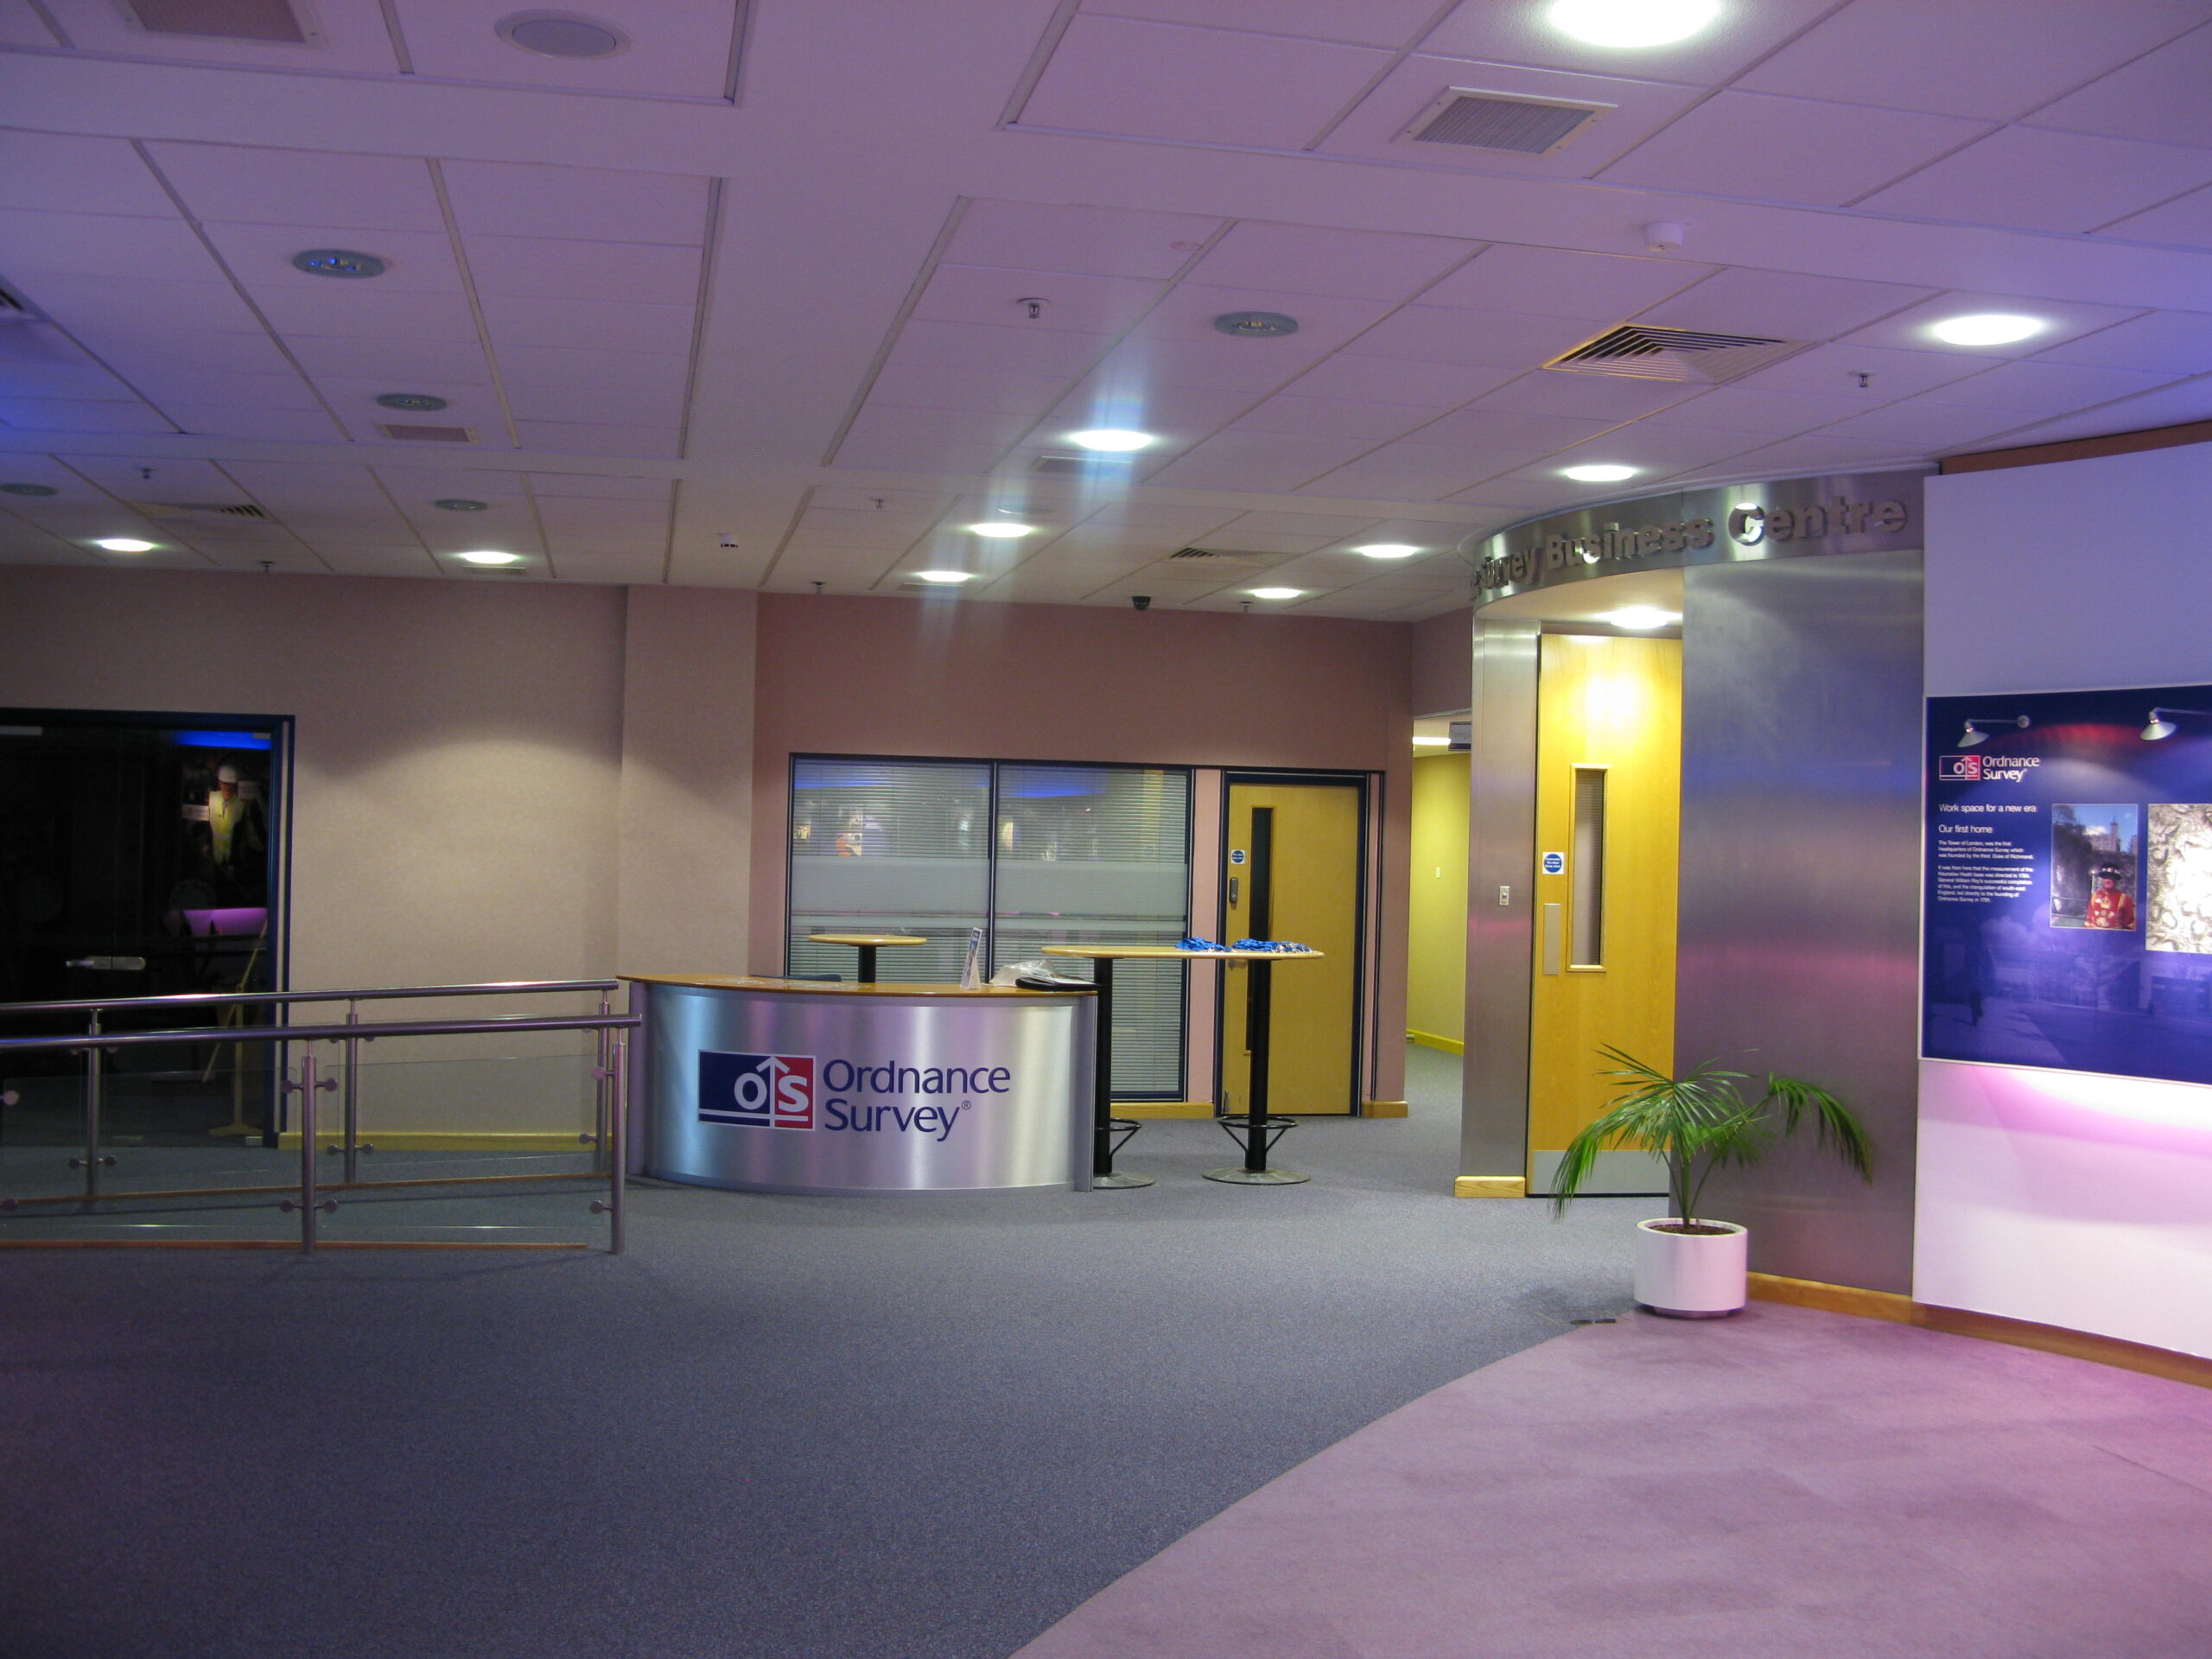 Visitors' waiting area by the entrance to the Business Centre.